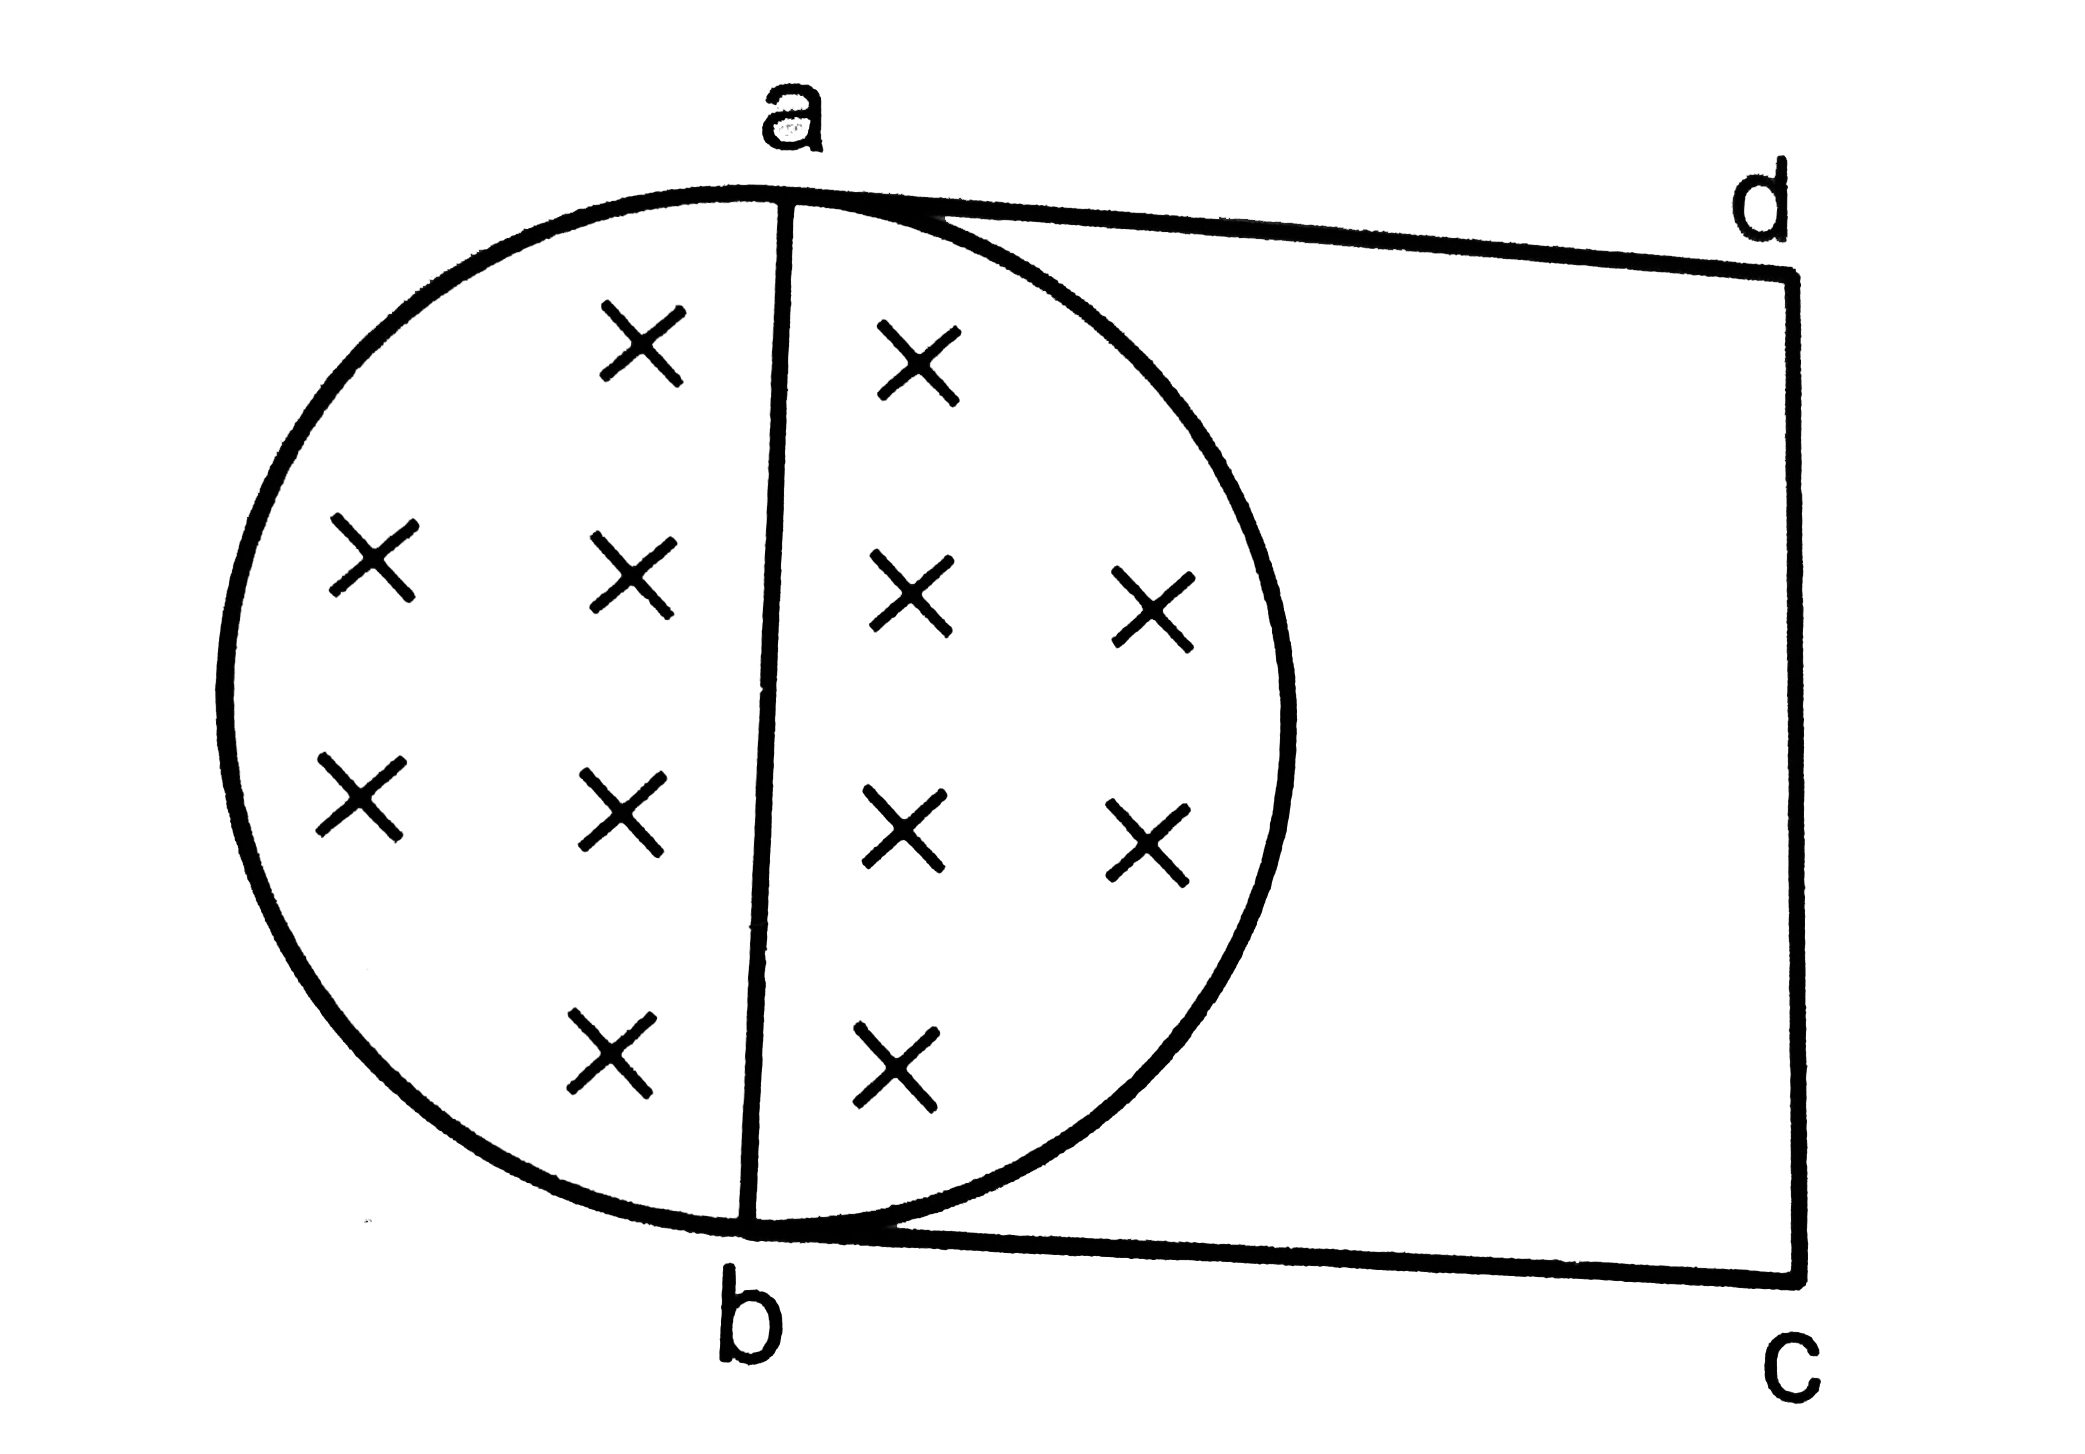 A uniform magnetic field B exists in a cylindrical region of radius 10 cm as shown in. A uniform wire of length 80 cm and resistance 4.0 Omega is bent into a square frame and is placed with one side along a diameter of the cylindrical region. If the magnetic field increases at a  constant rate of 0.010 T/s, find the current induced in the frame.